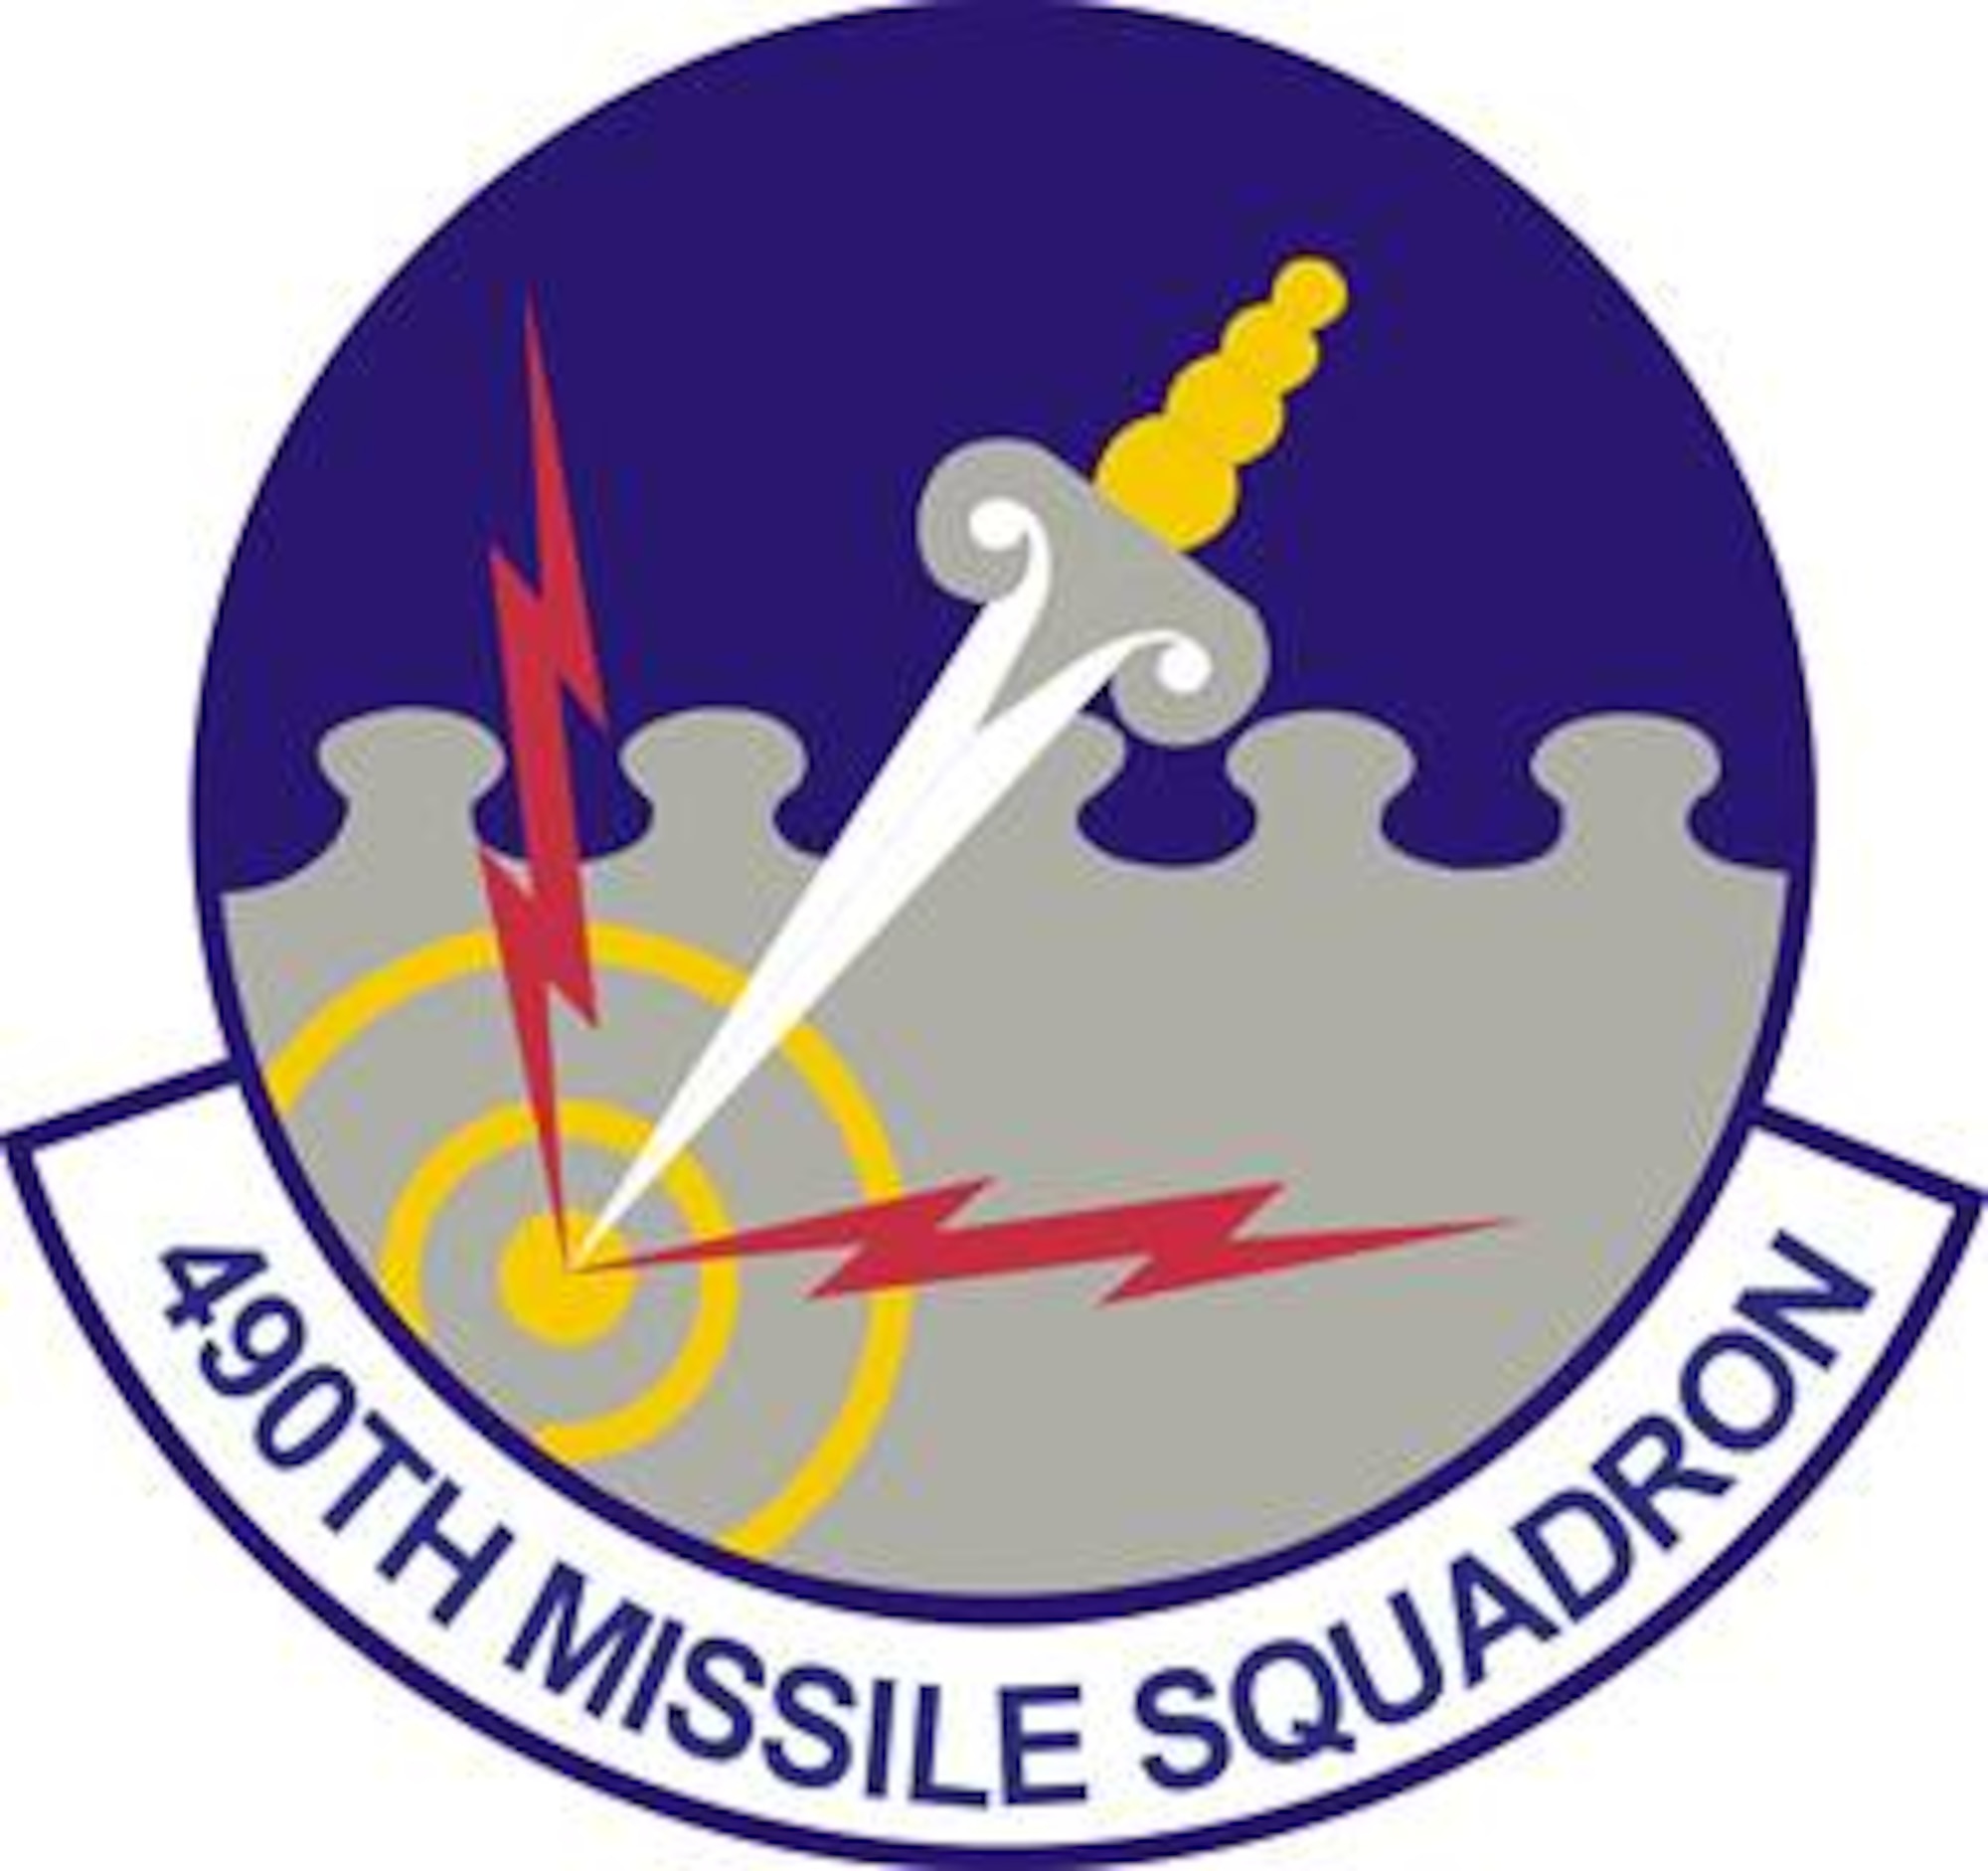 490th Missile Squadron patch